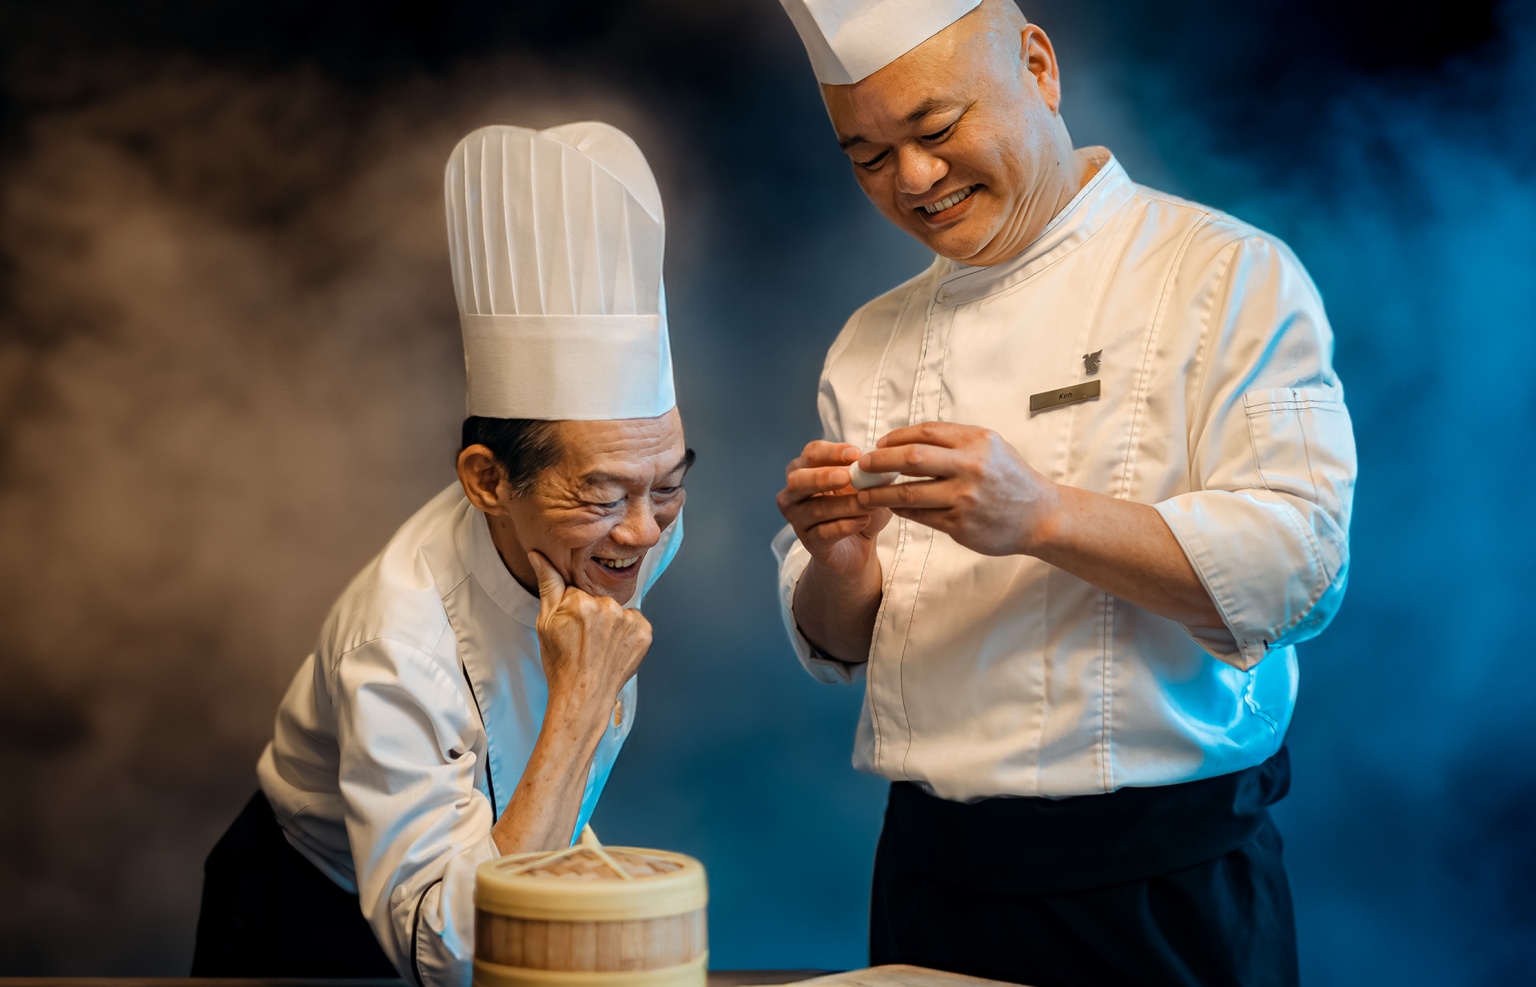 Sheraton Saigon elevates dim sum experience with Cantonese guest chef